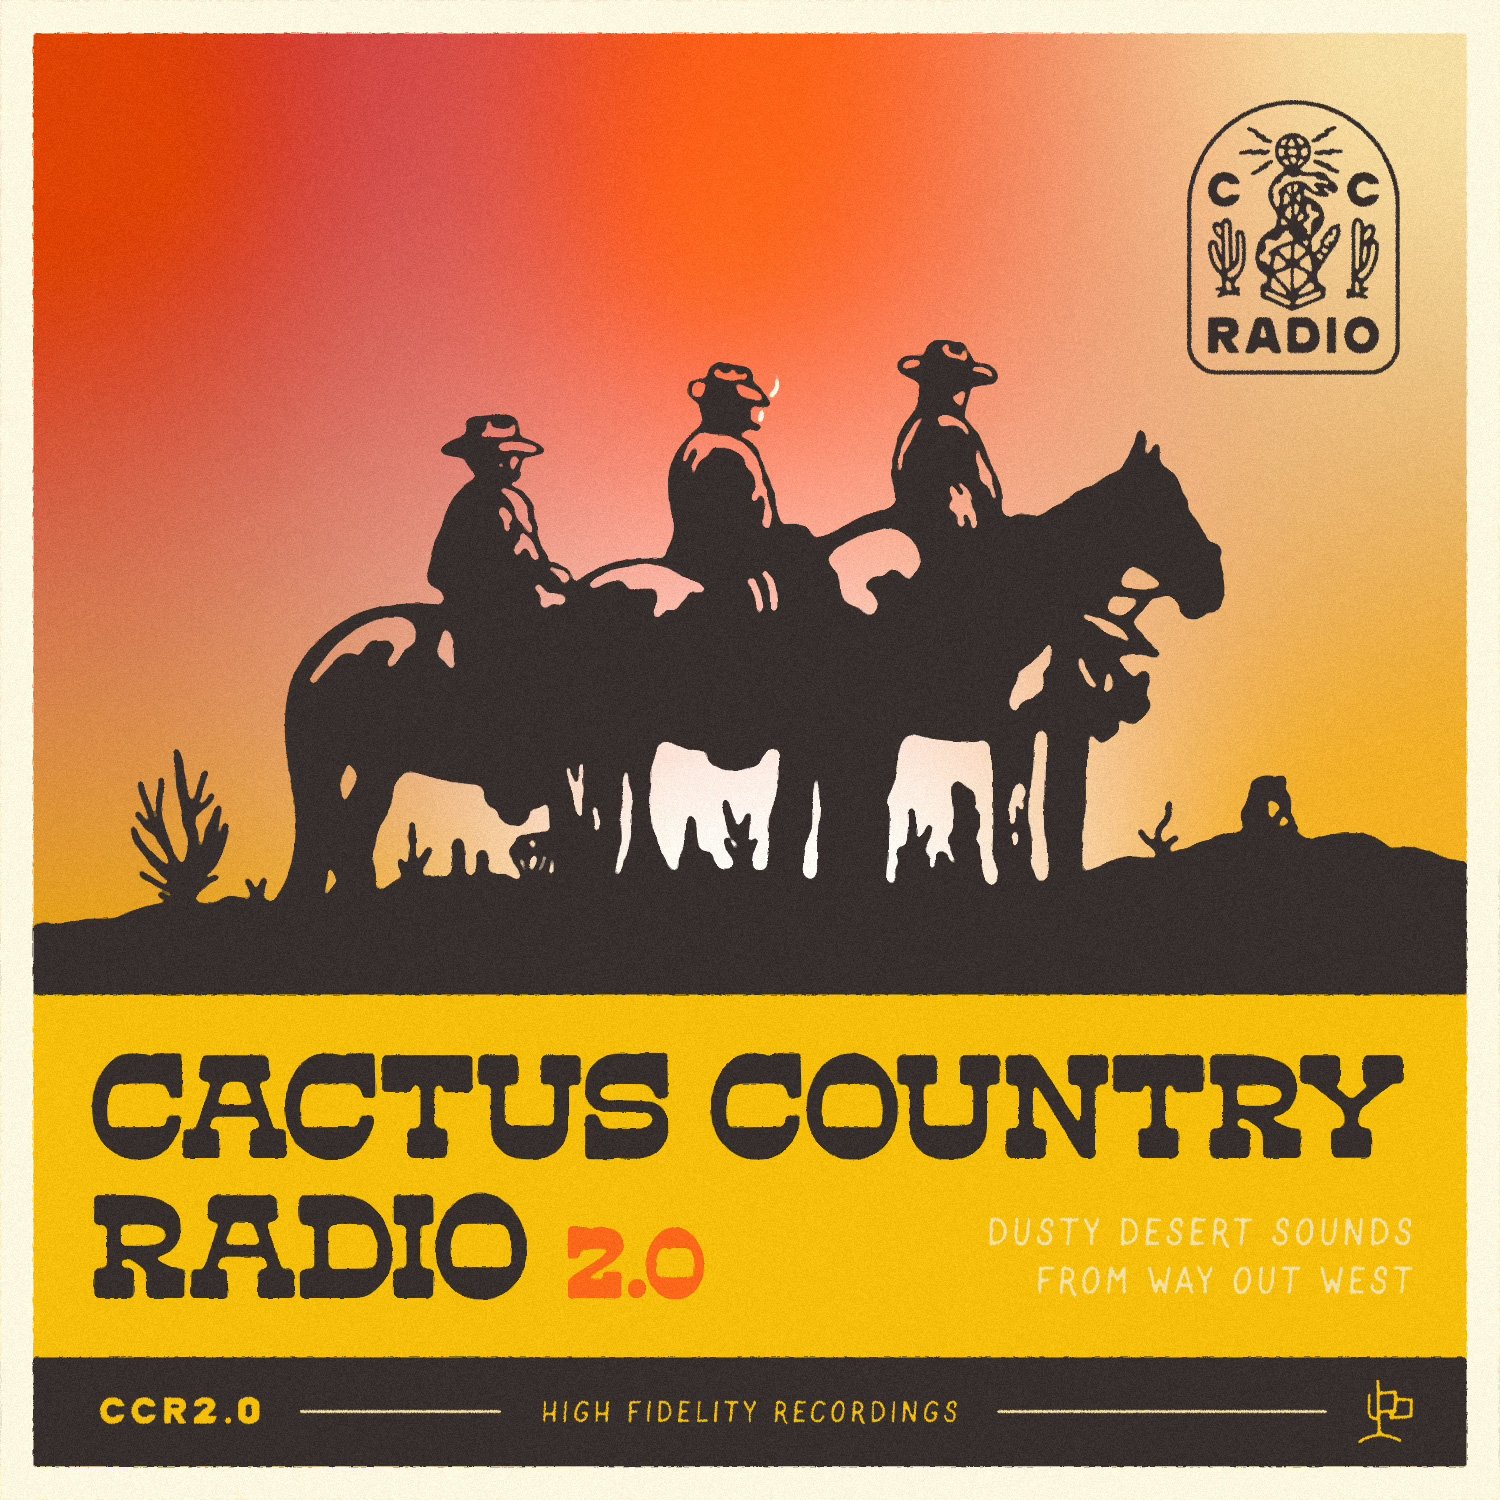  Cactus Country Radio 2.0 playlist cover design by Cactus Country. 